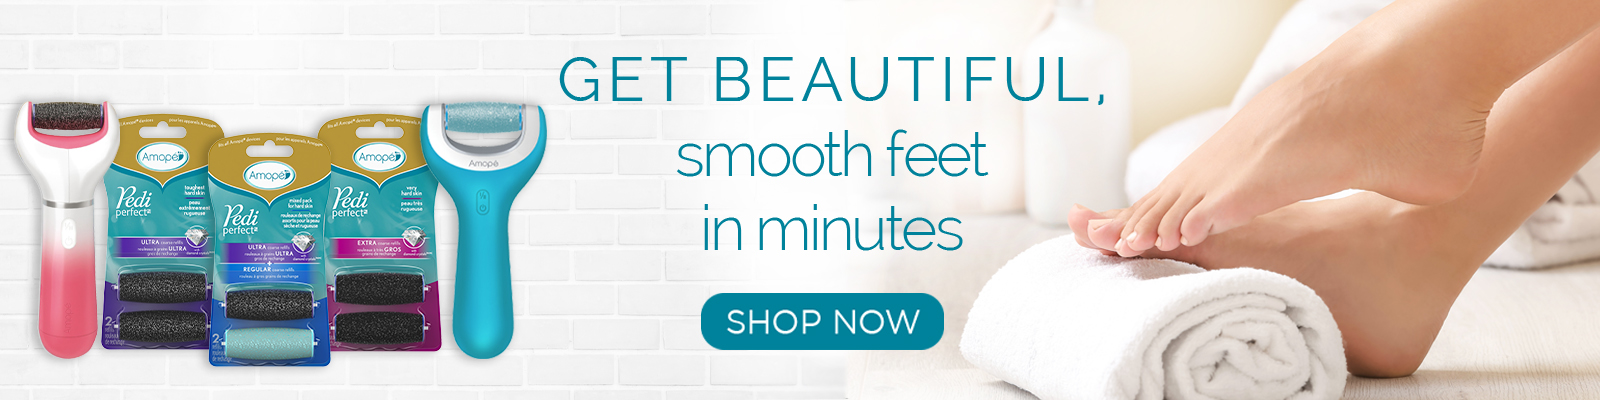 Get beautiful smooth feet in minutes with amope electronic foot file and roller heads